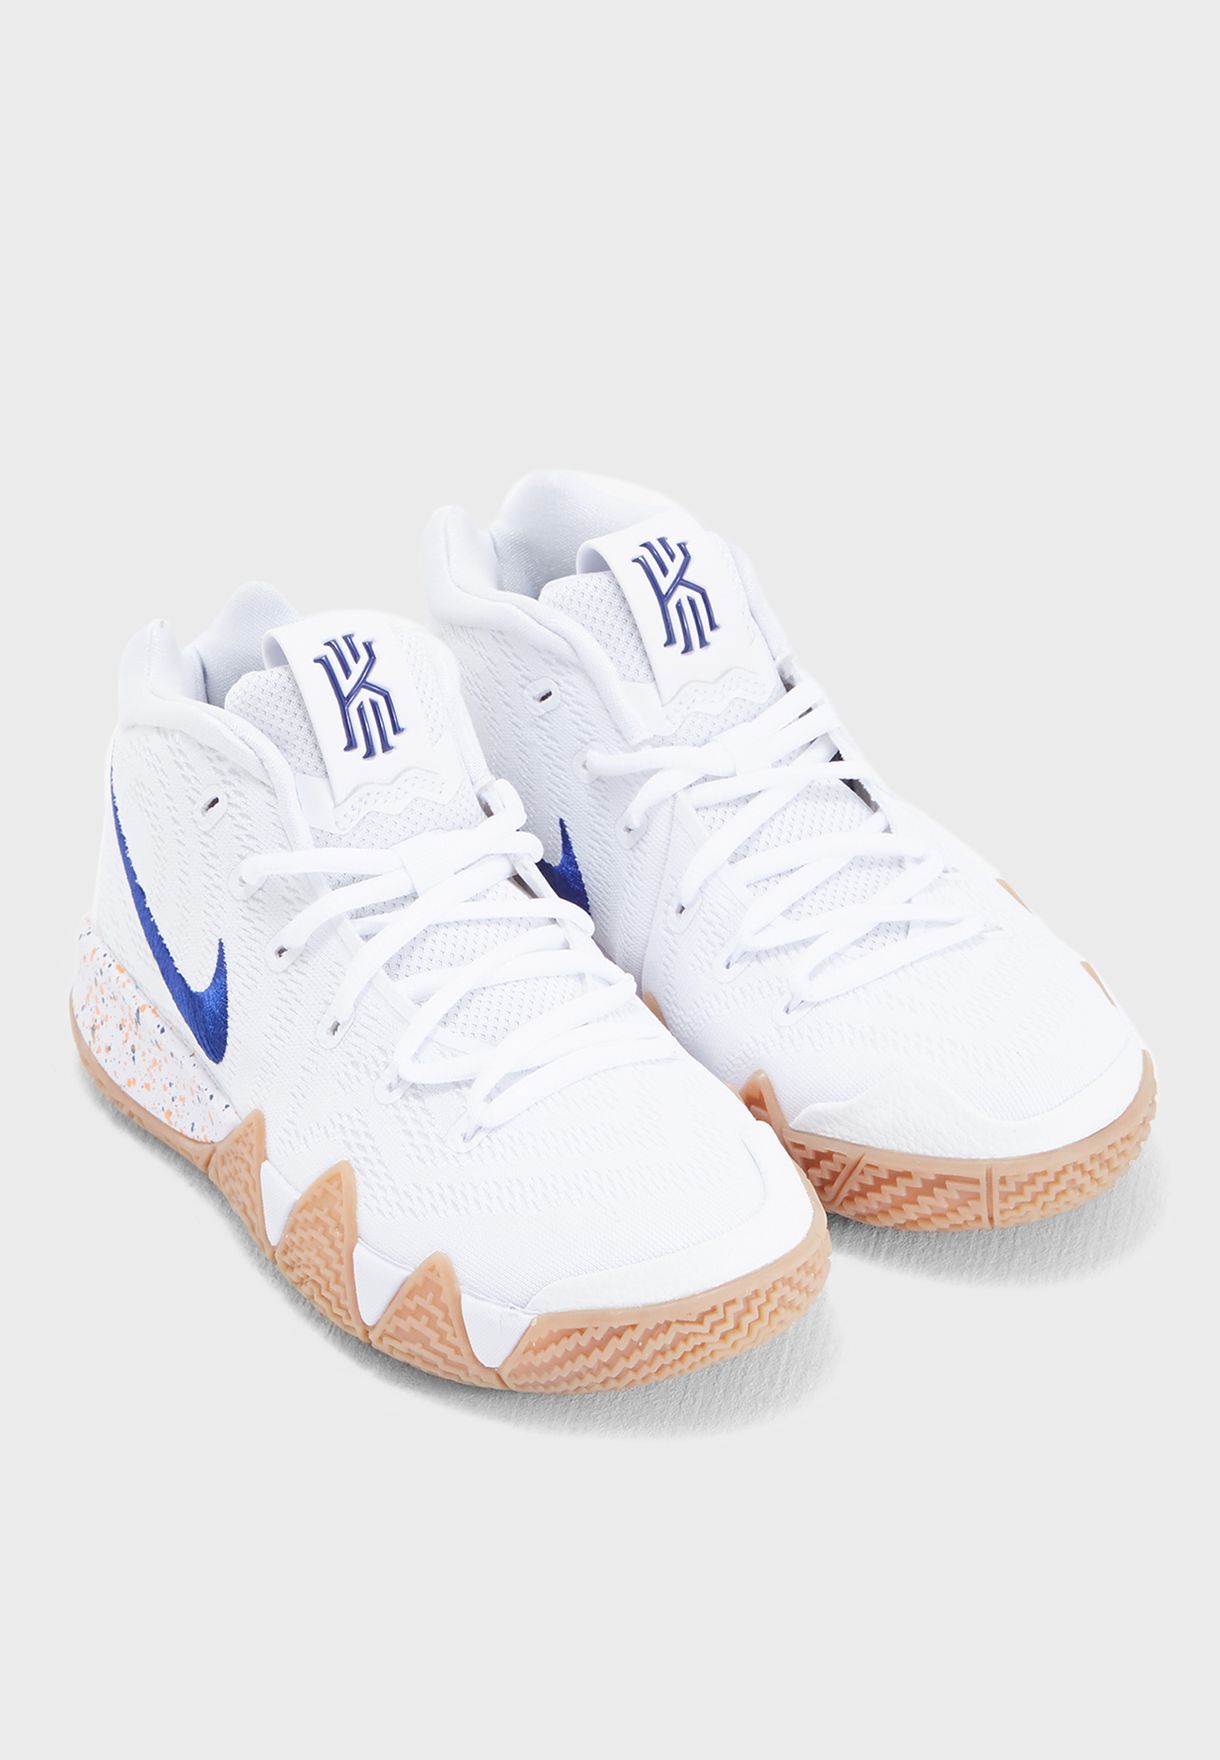 kyrie 4 youth